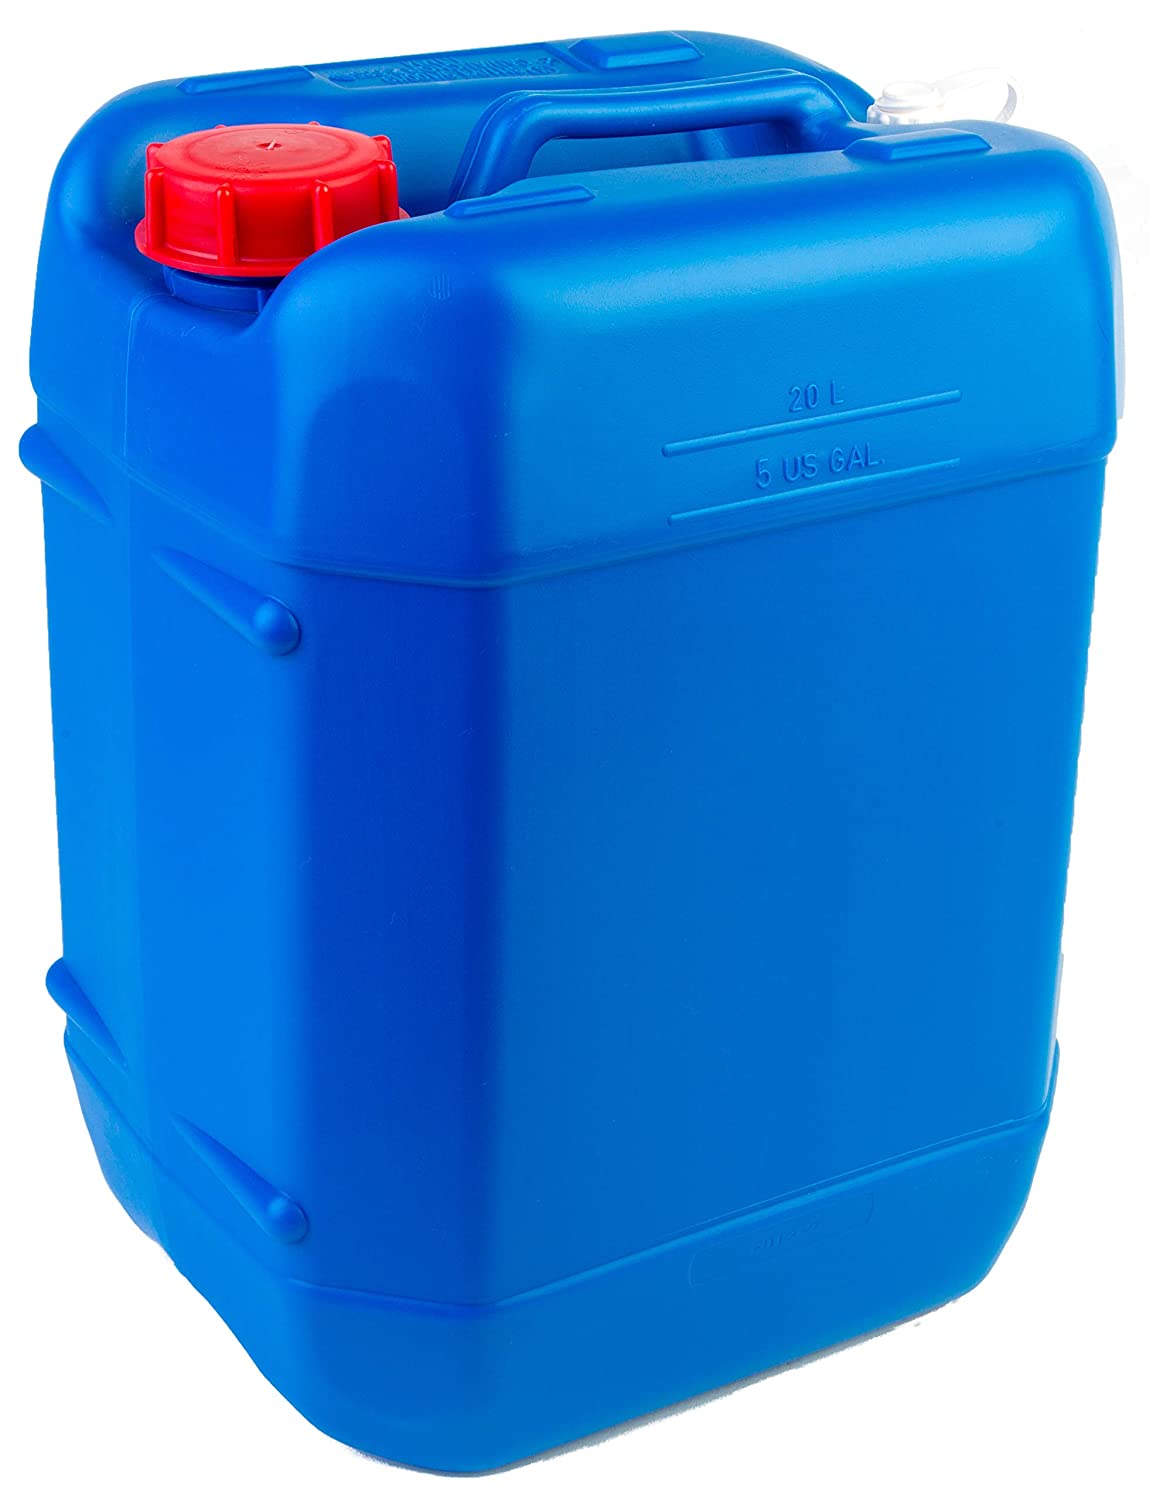 Hudson ExchangeHedpak Container with Cap